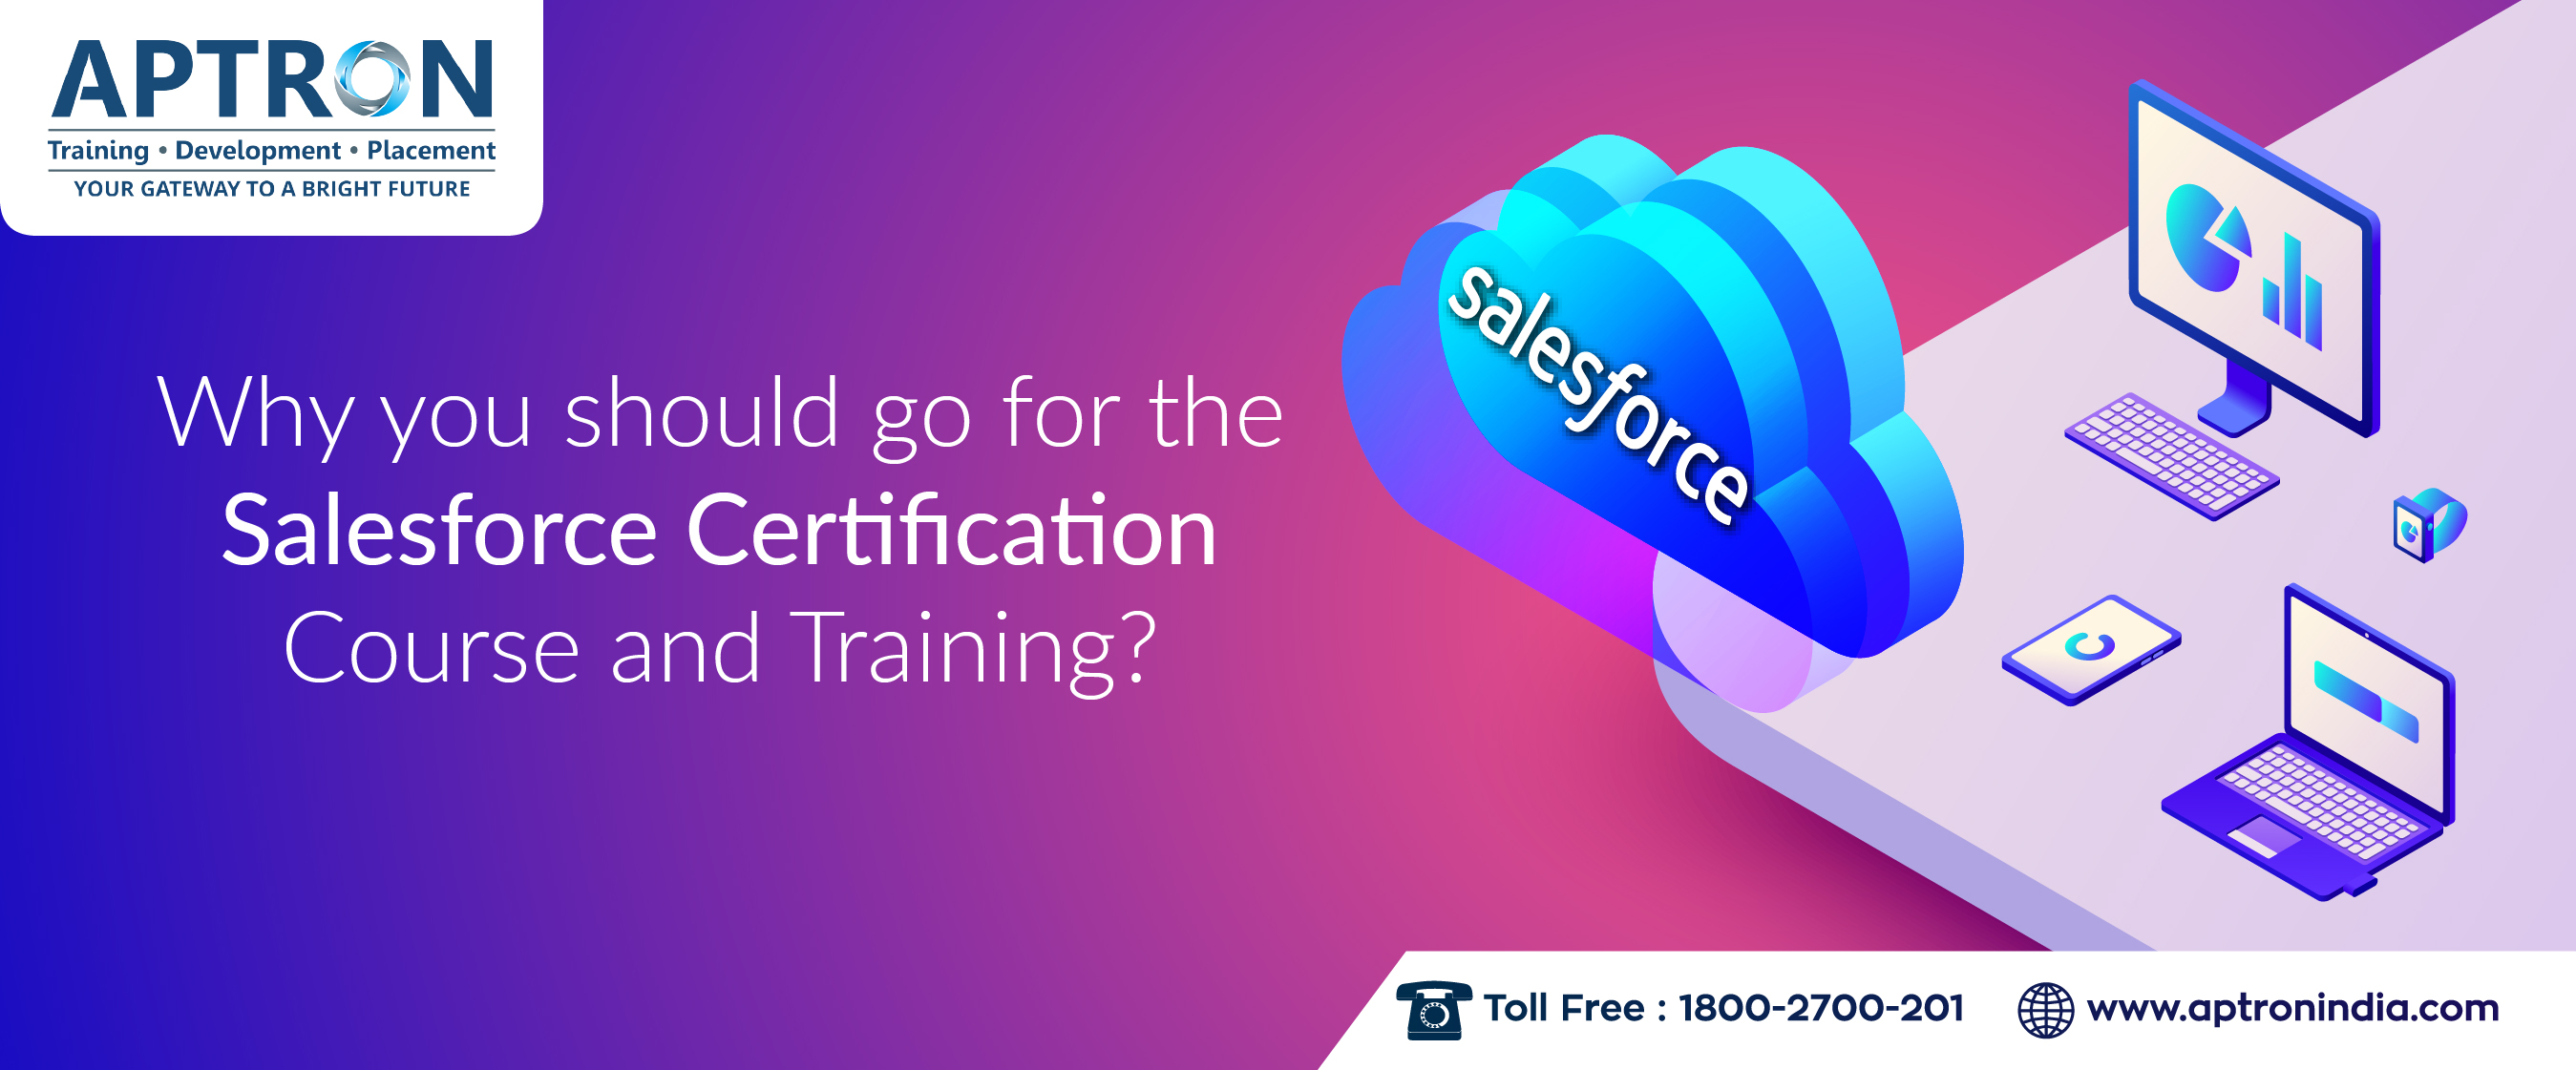 Why you should go for the Salesforce Certification Course and Training?